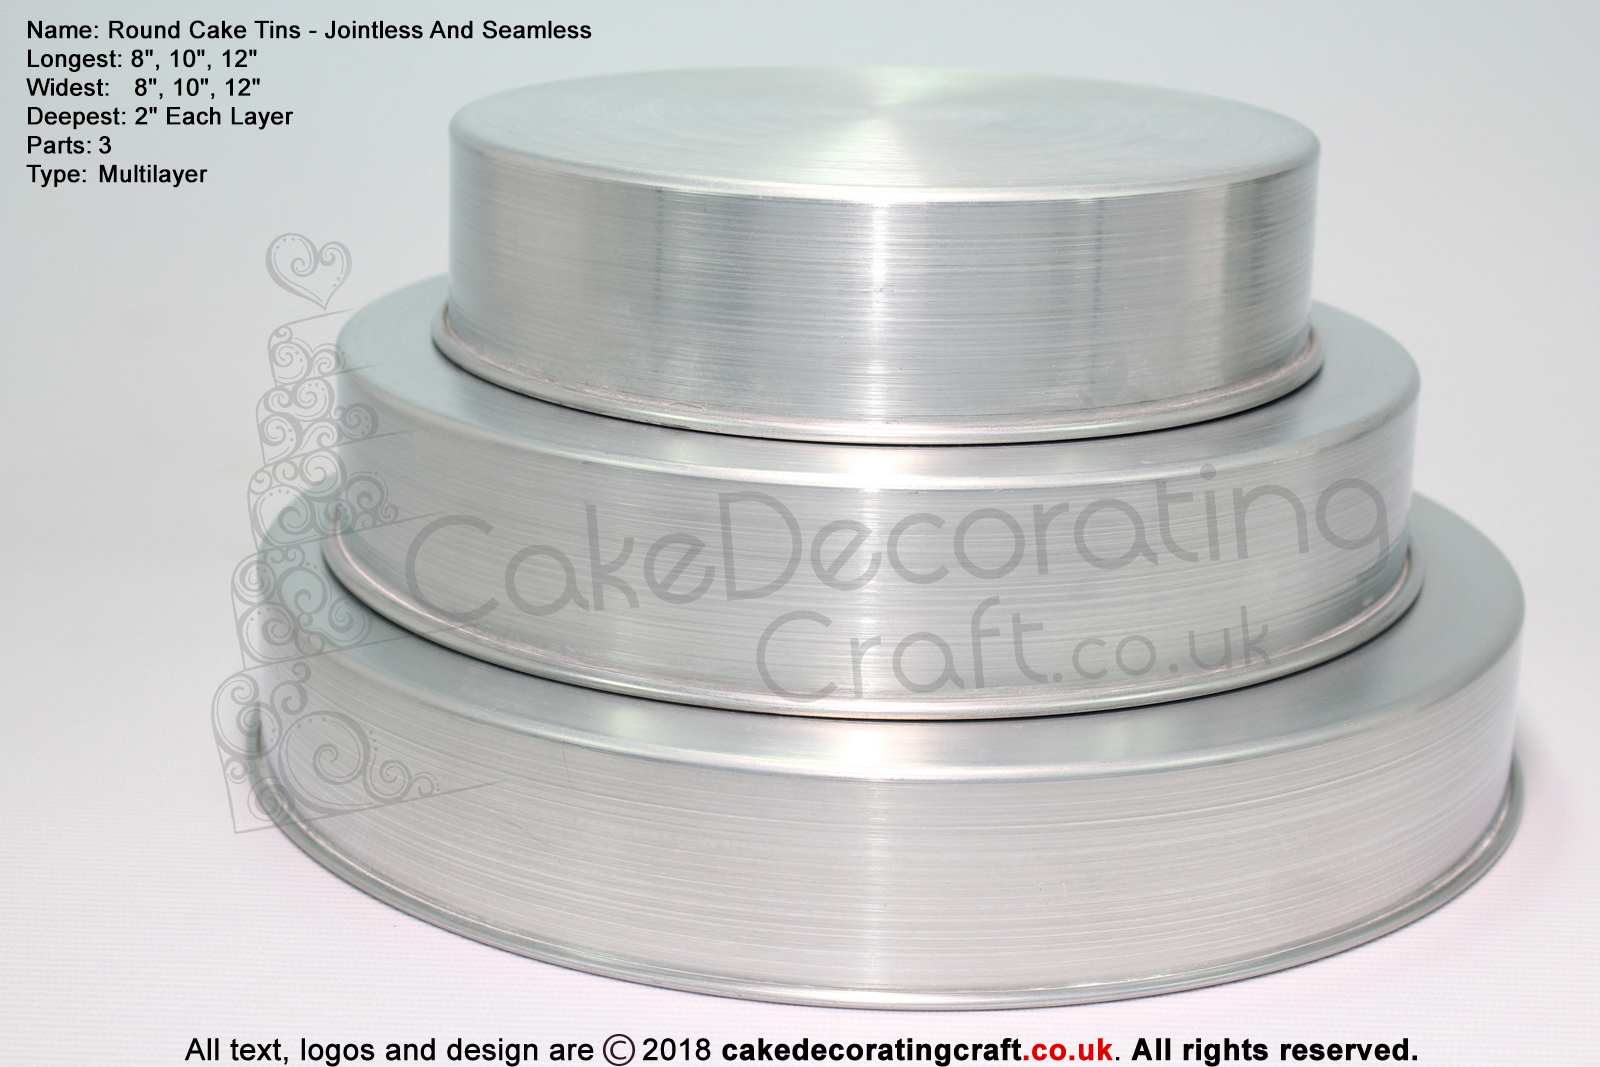 Round Cake Baking Tins | 2" Deep | Size 8 10 12 " | 3 Tiers | Jointless & Seamless | Rainbow | Multi Layer